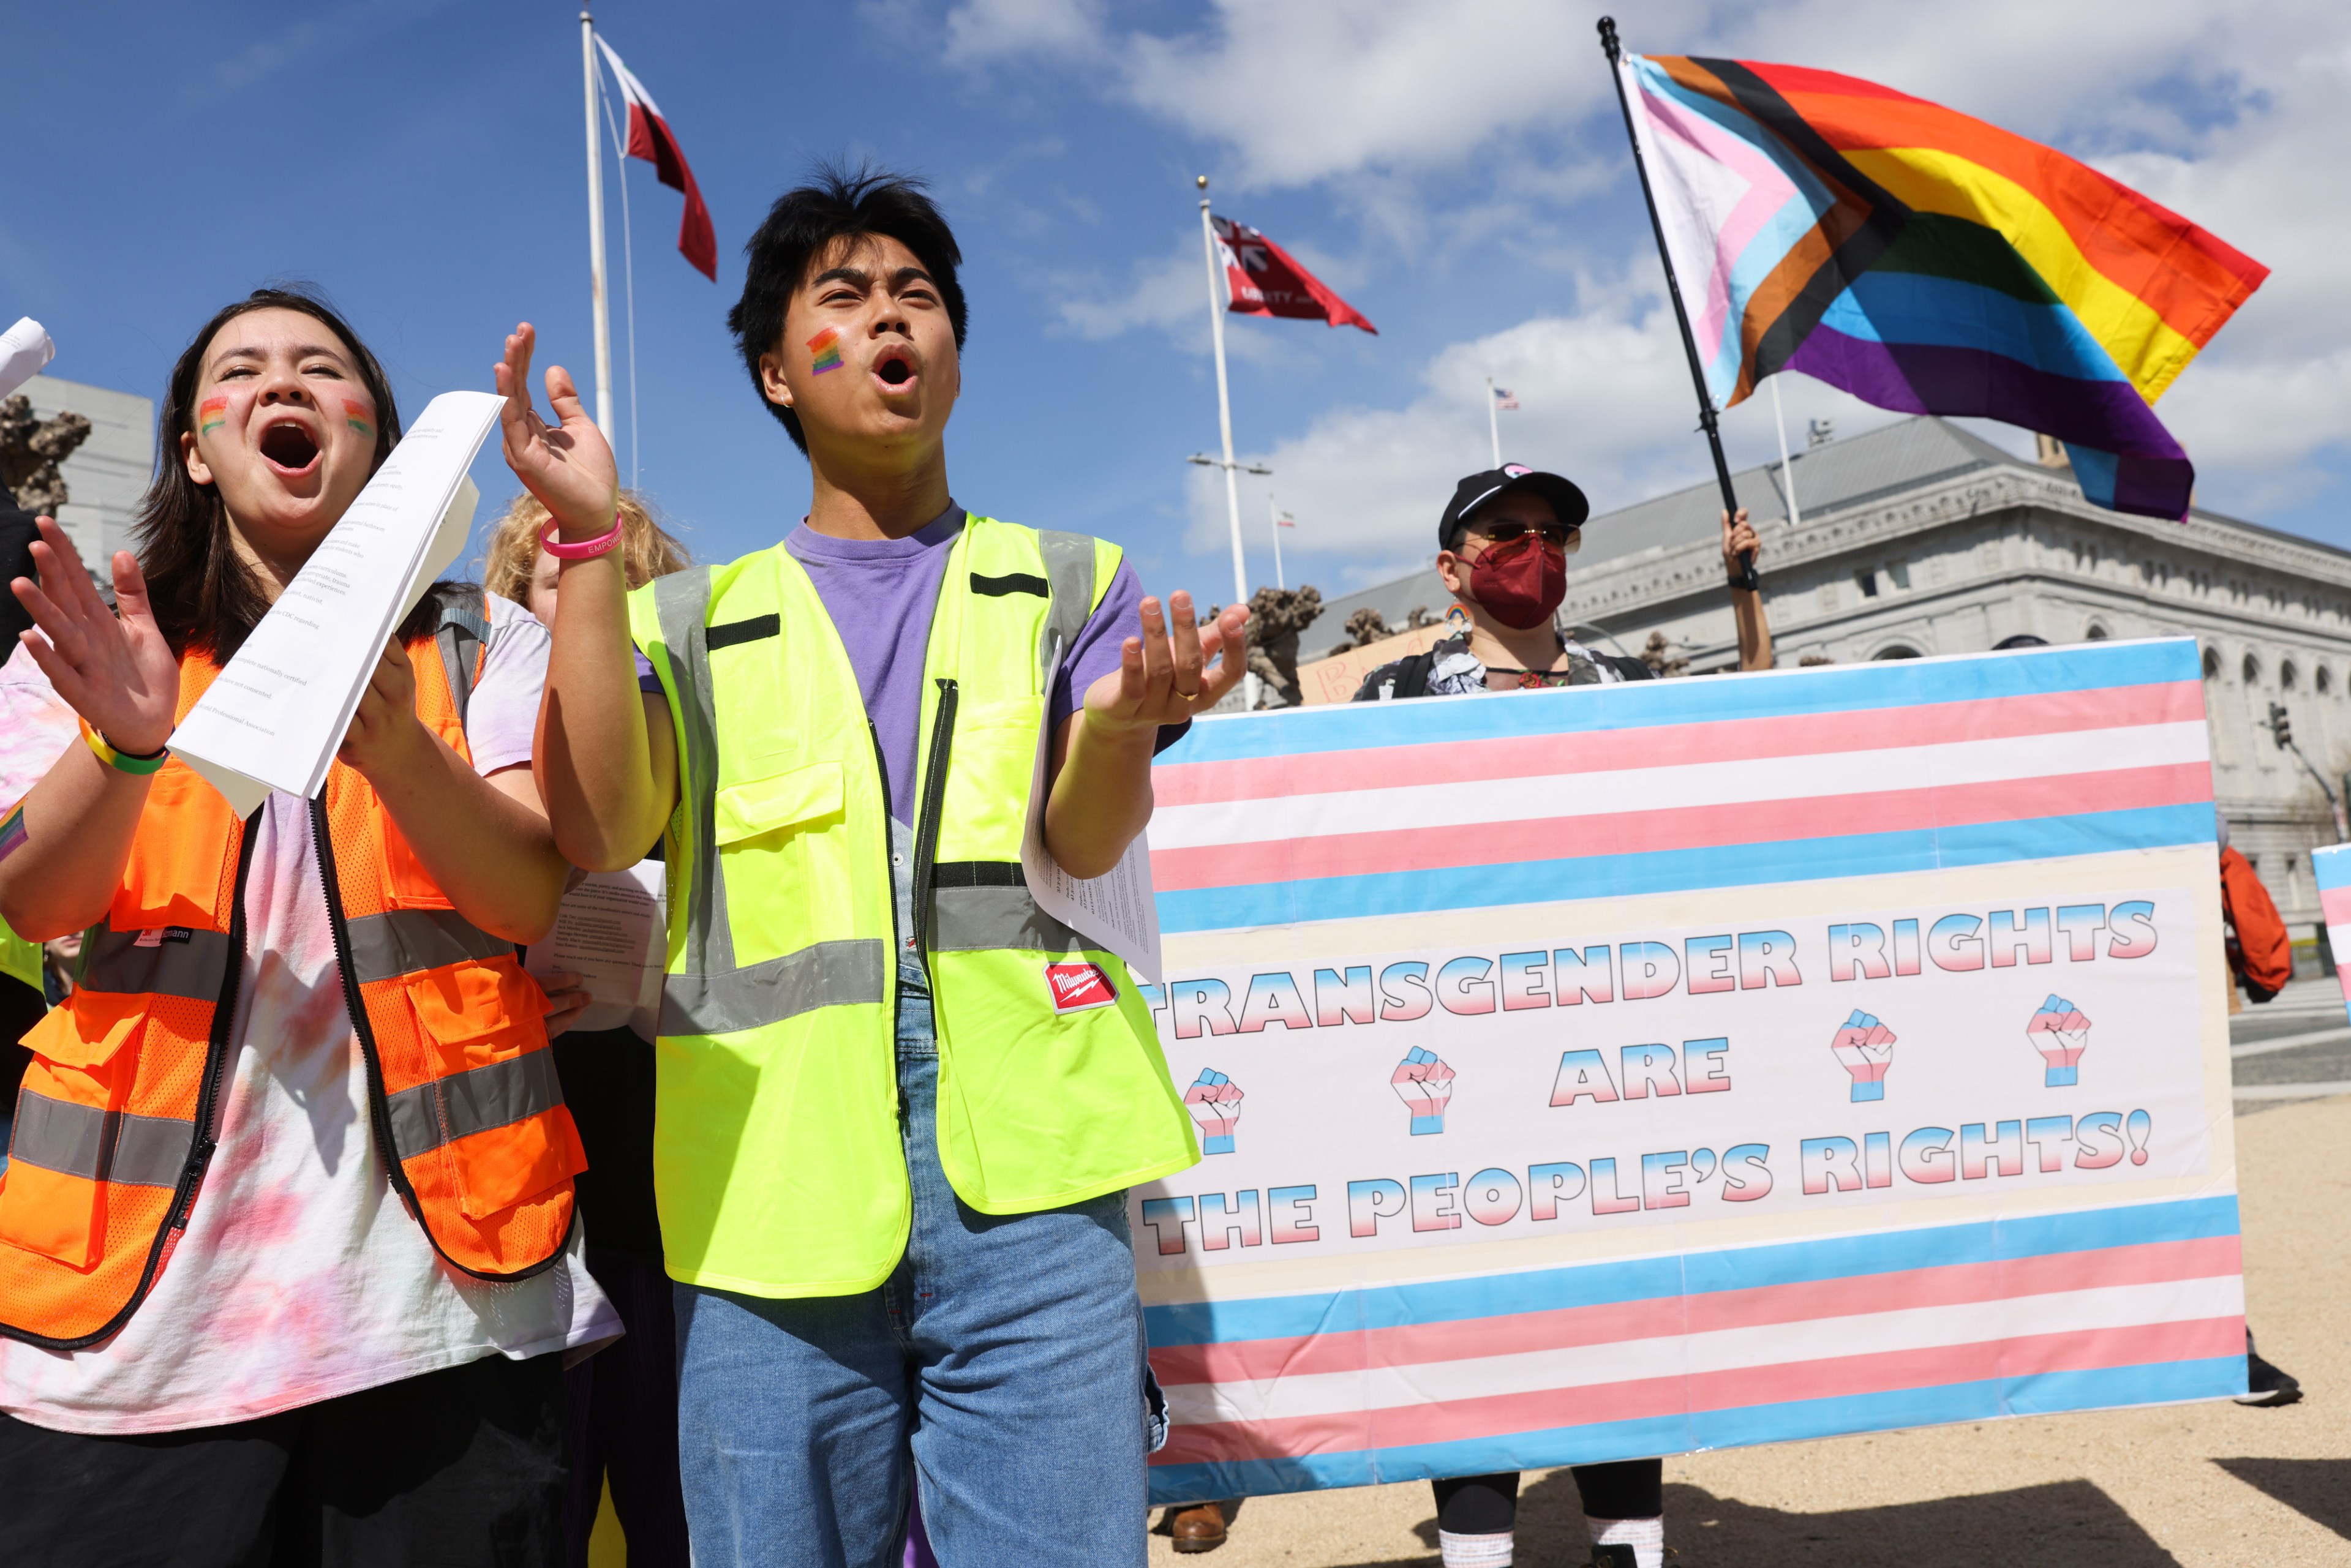 shot from below, three young people in safety vests chant and hold up a trans flag protest sign with a Progress Flag behind them.